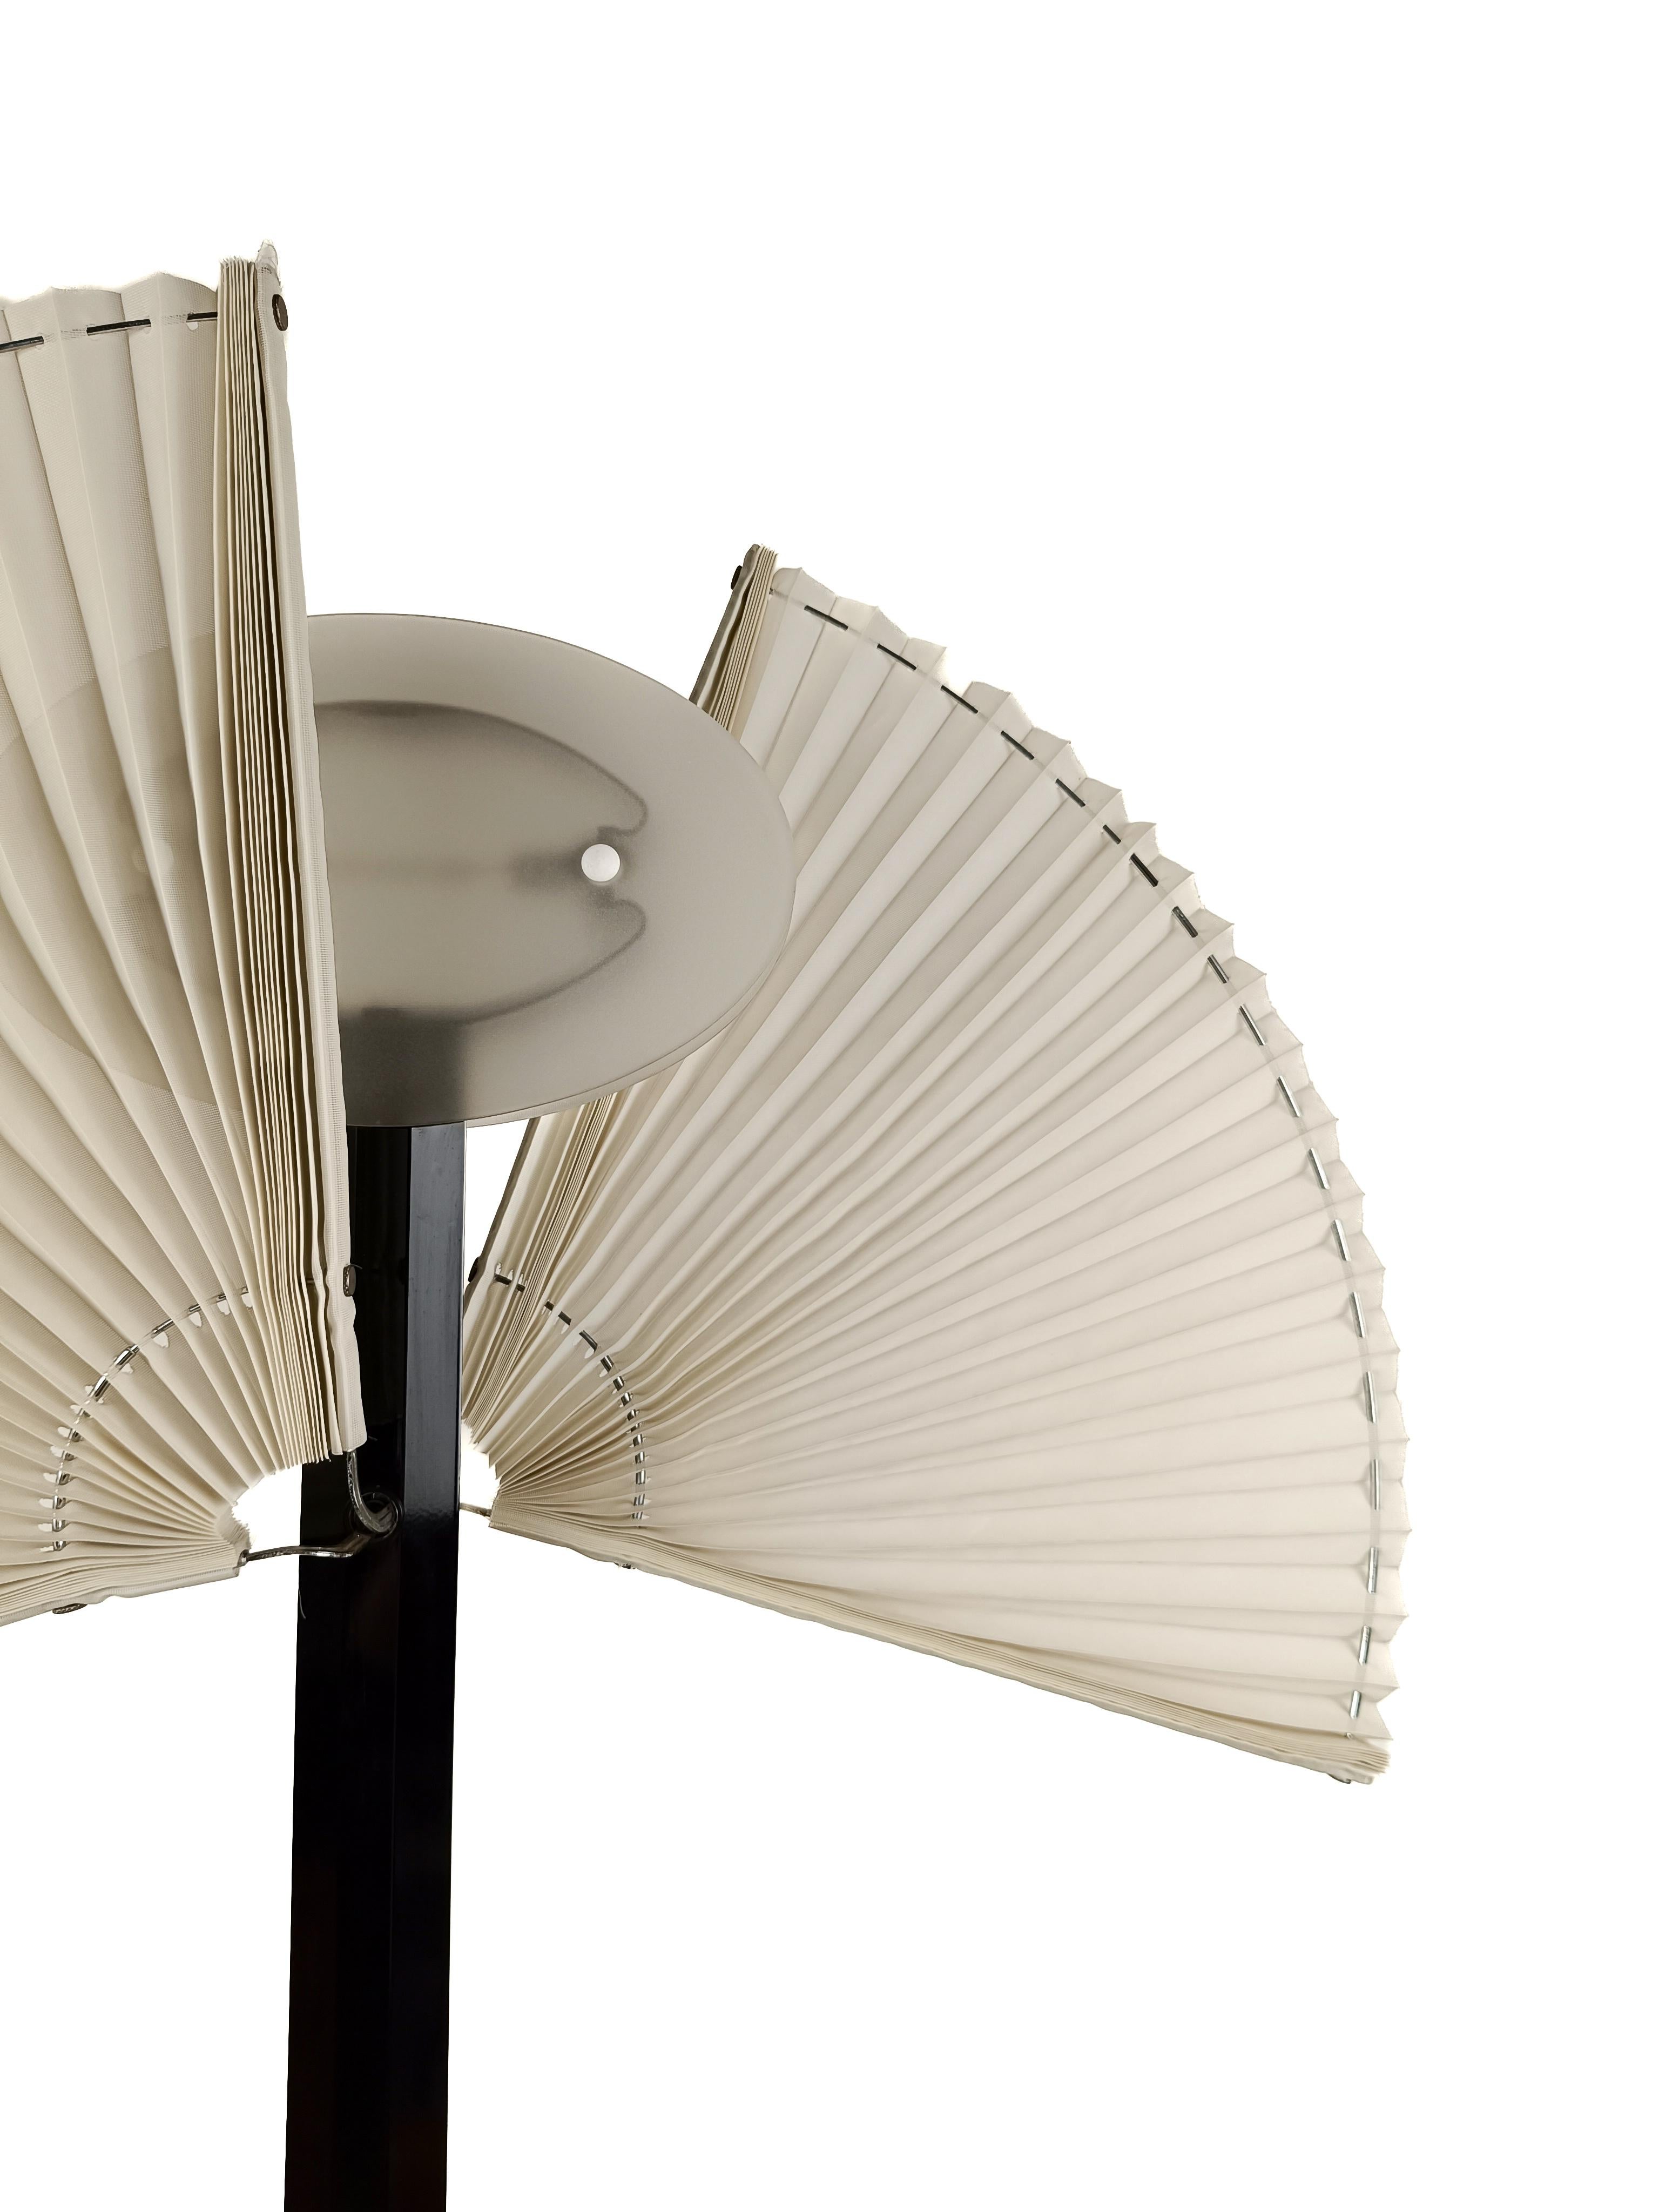 A special, poetic and currently out of production Floor Lamp designed by Afra and Tobia Scarpa for the Italian company 